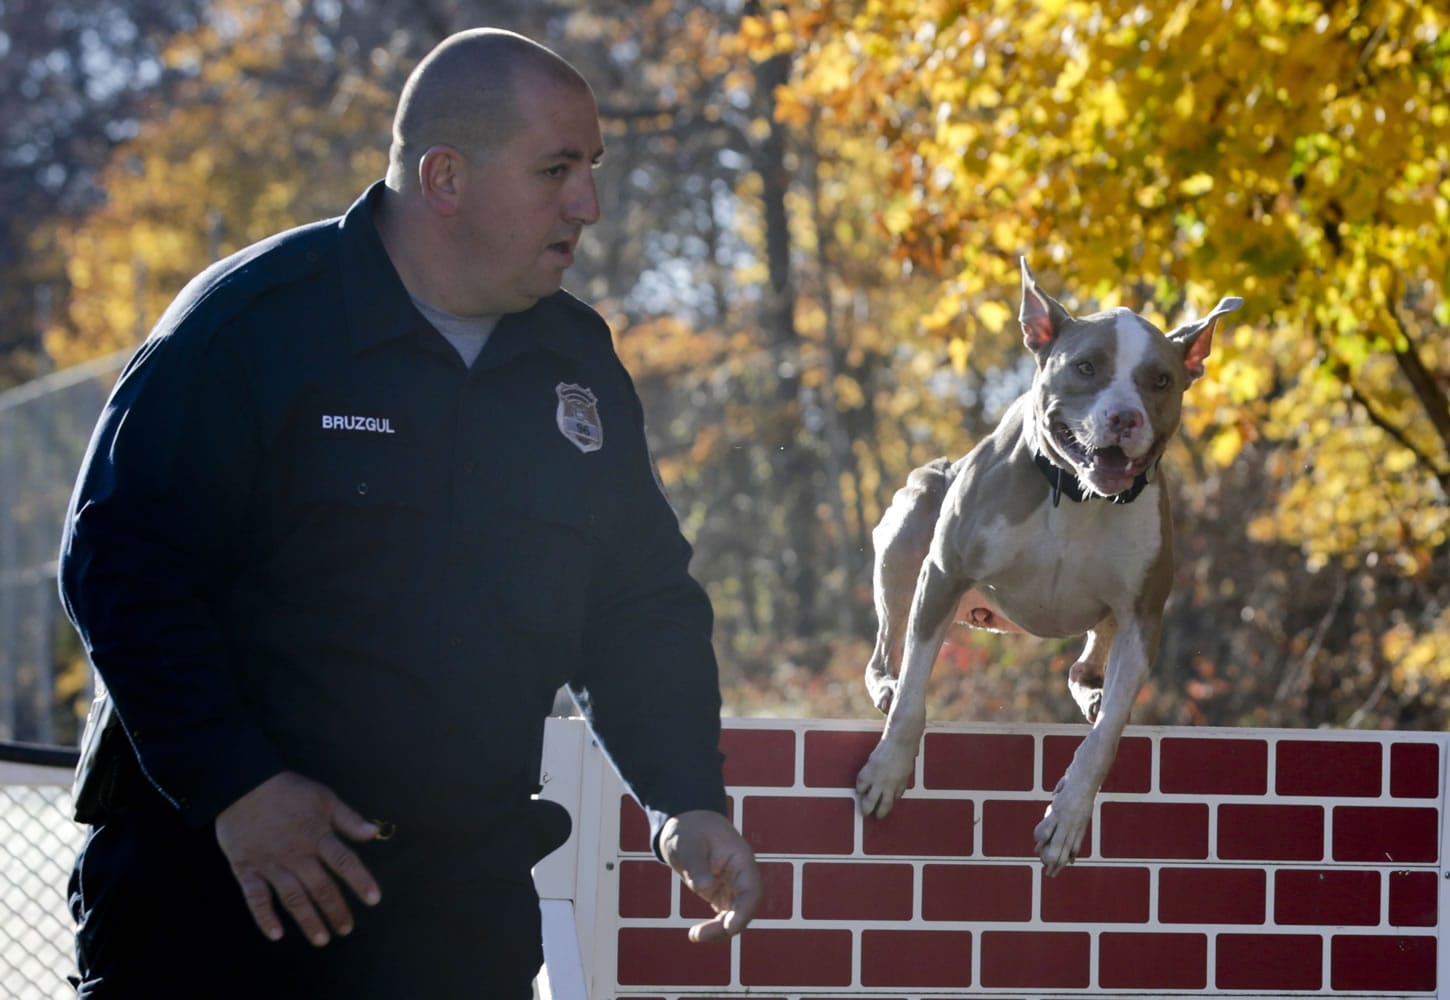 Poughkeepsie, N.Y., police Officer Justin Bruzgul runs with Kiah on Nov. 4 on an obstacle course at K-9 school in Stone Ridge, N.Y. Kiah, a 2 1/2 -year-old pit bull, will soon join the Poughkeepsie Police Department as a crime-fighting, drug-sniffing police dog, a move that advocates of the breed say will counter the stereotypical image of the dog as a dangerous breed beloved by criminals.